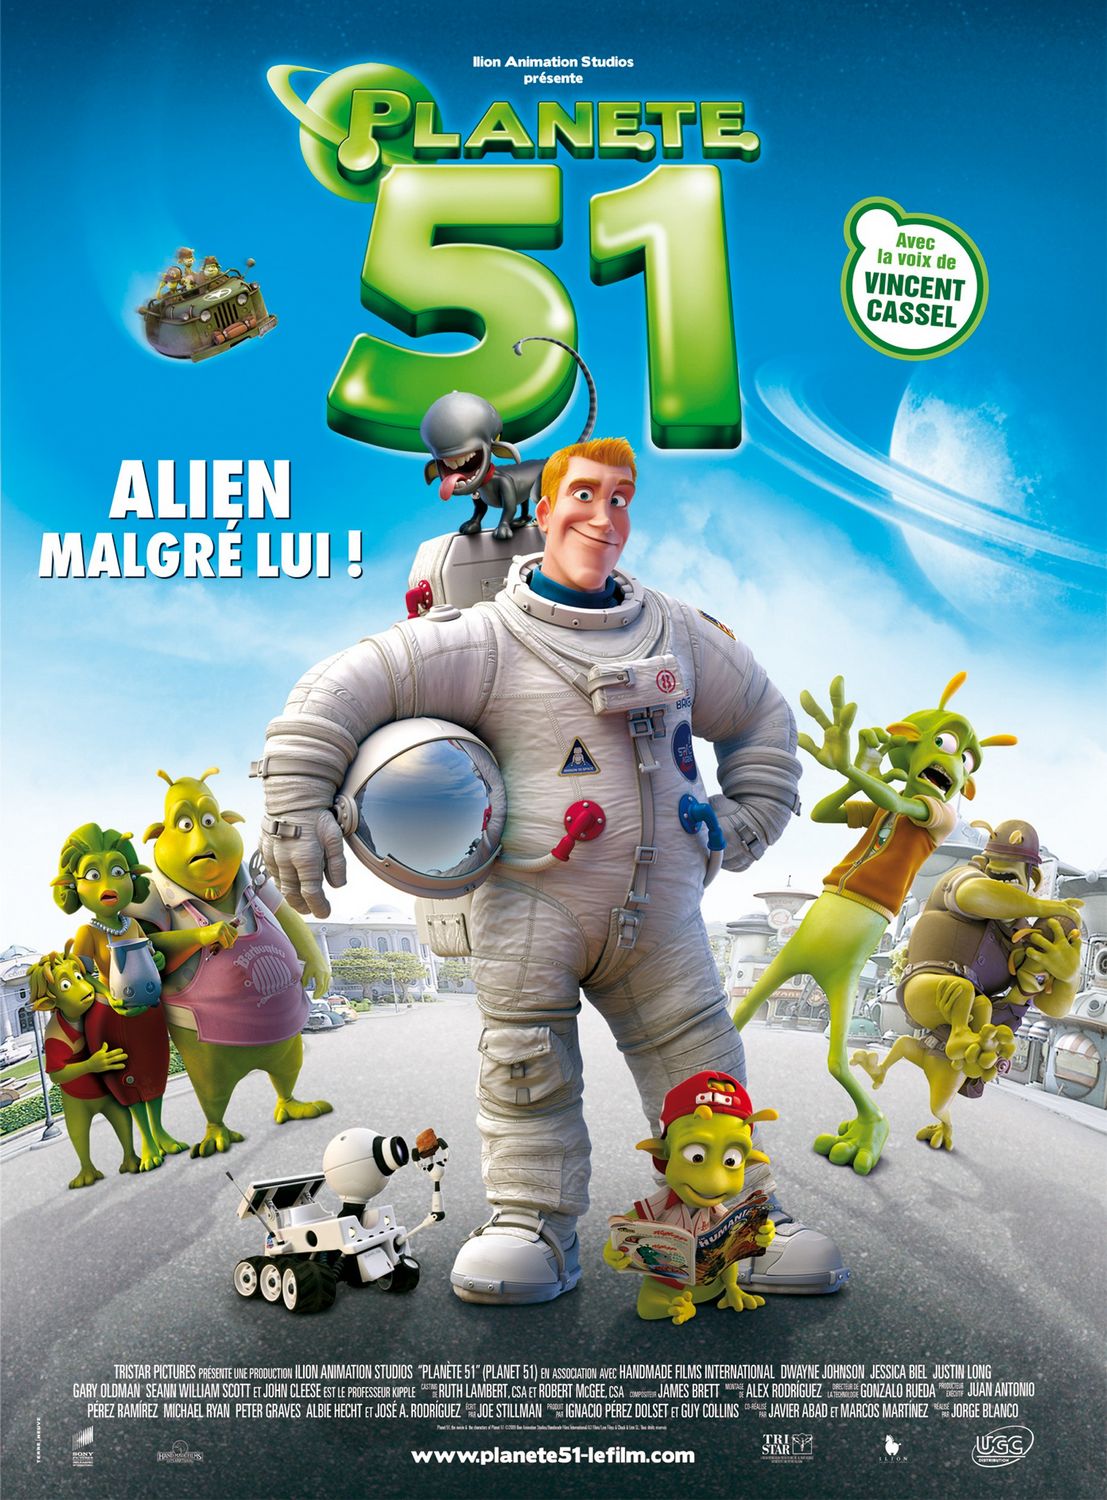 planet 51 movie poster